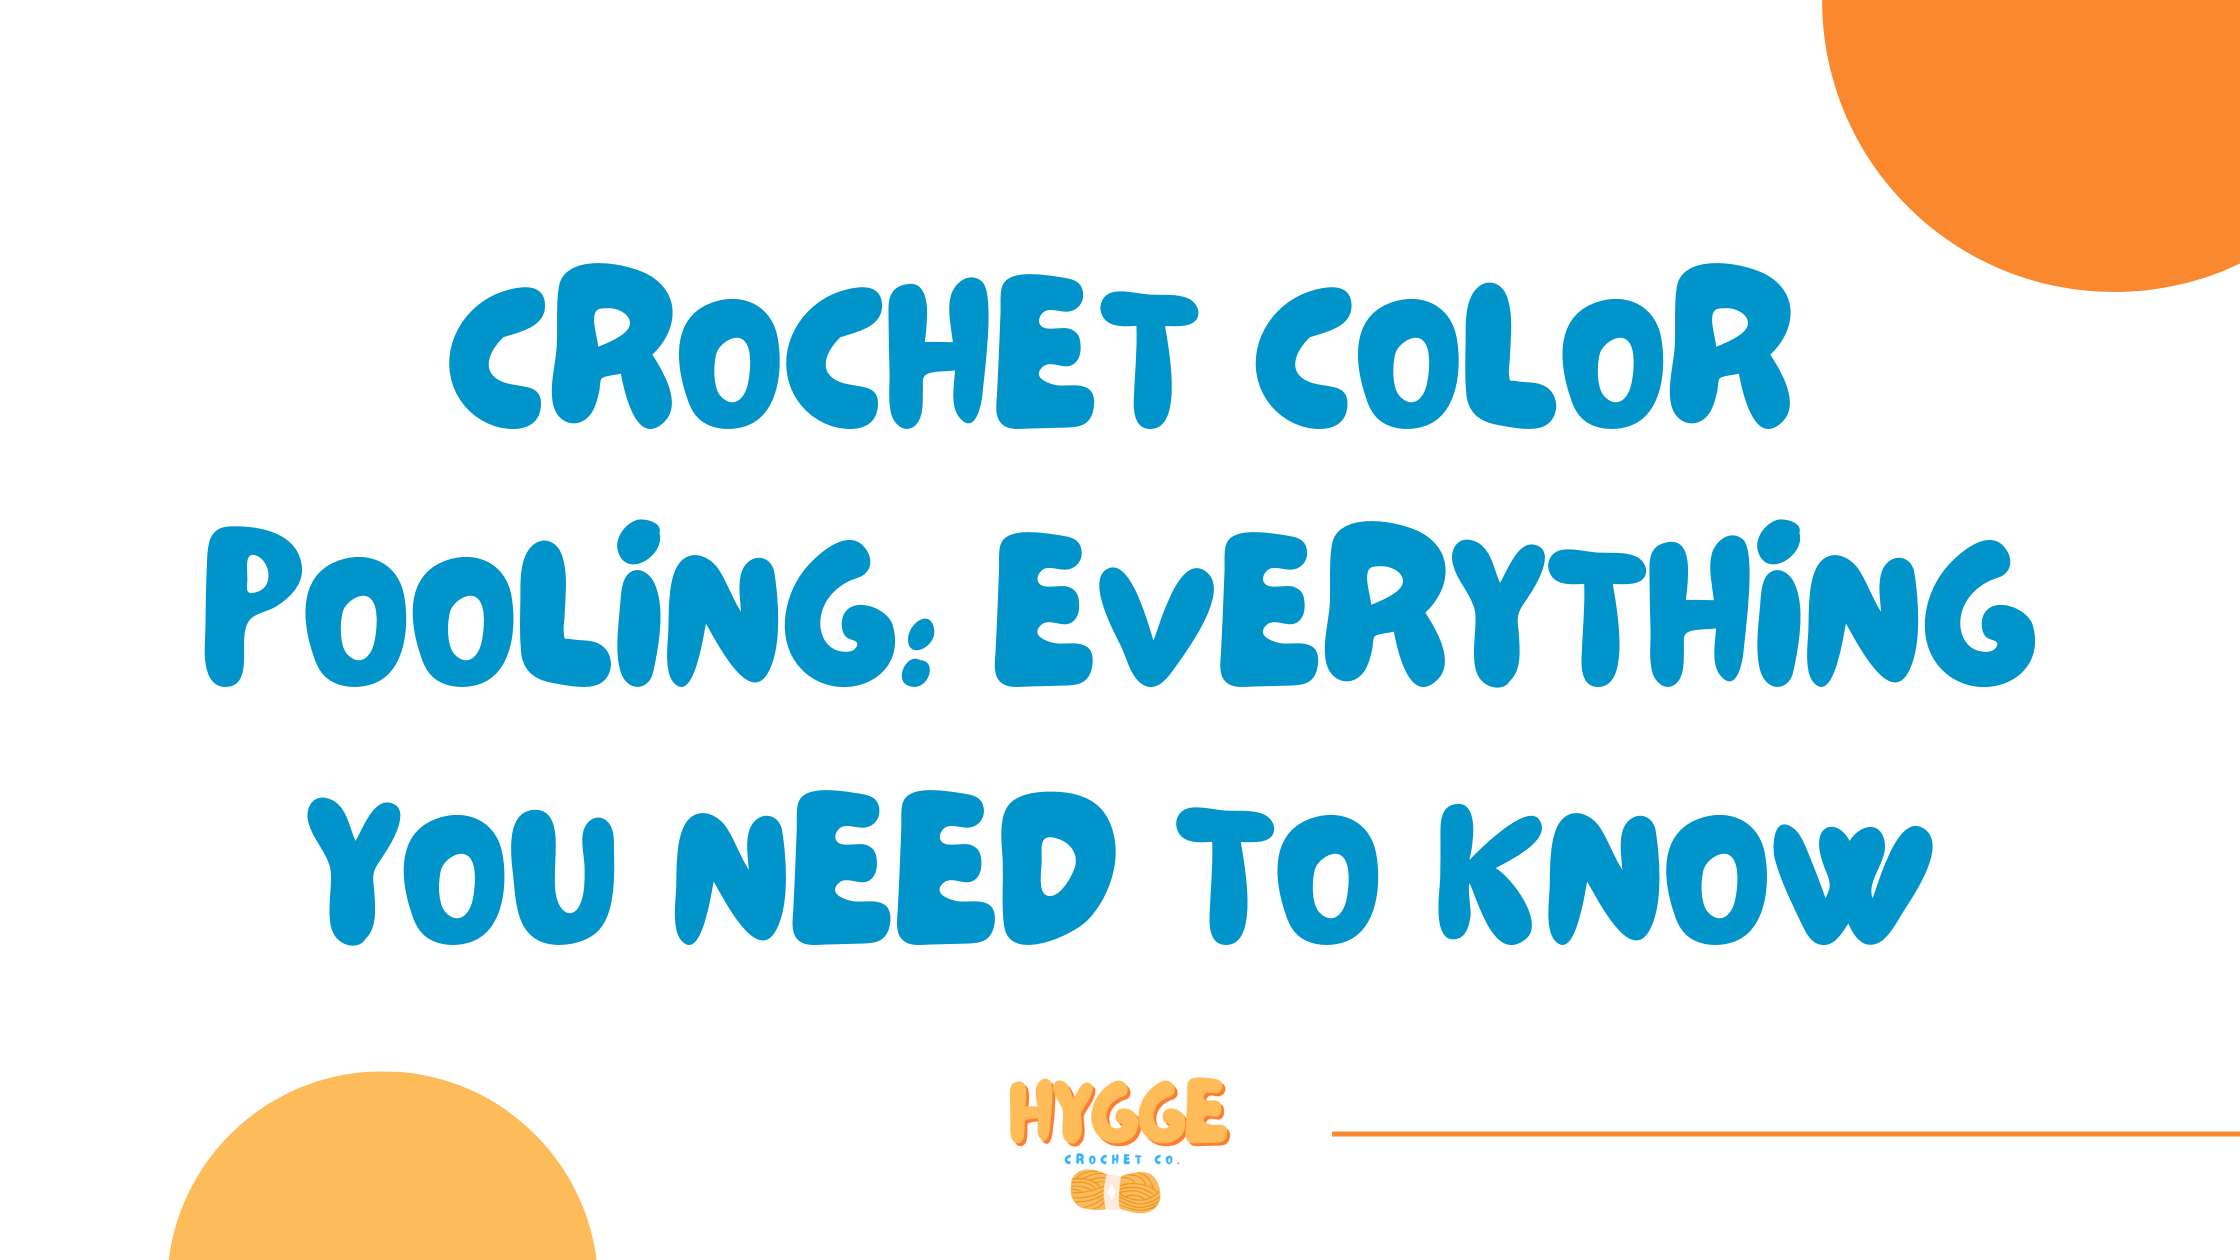 crochet color pooling: everything you need to know